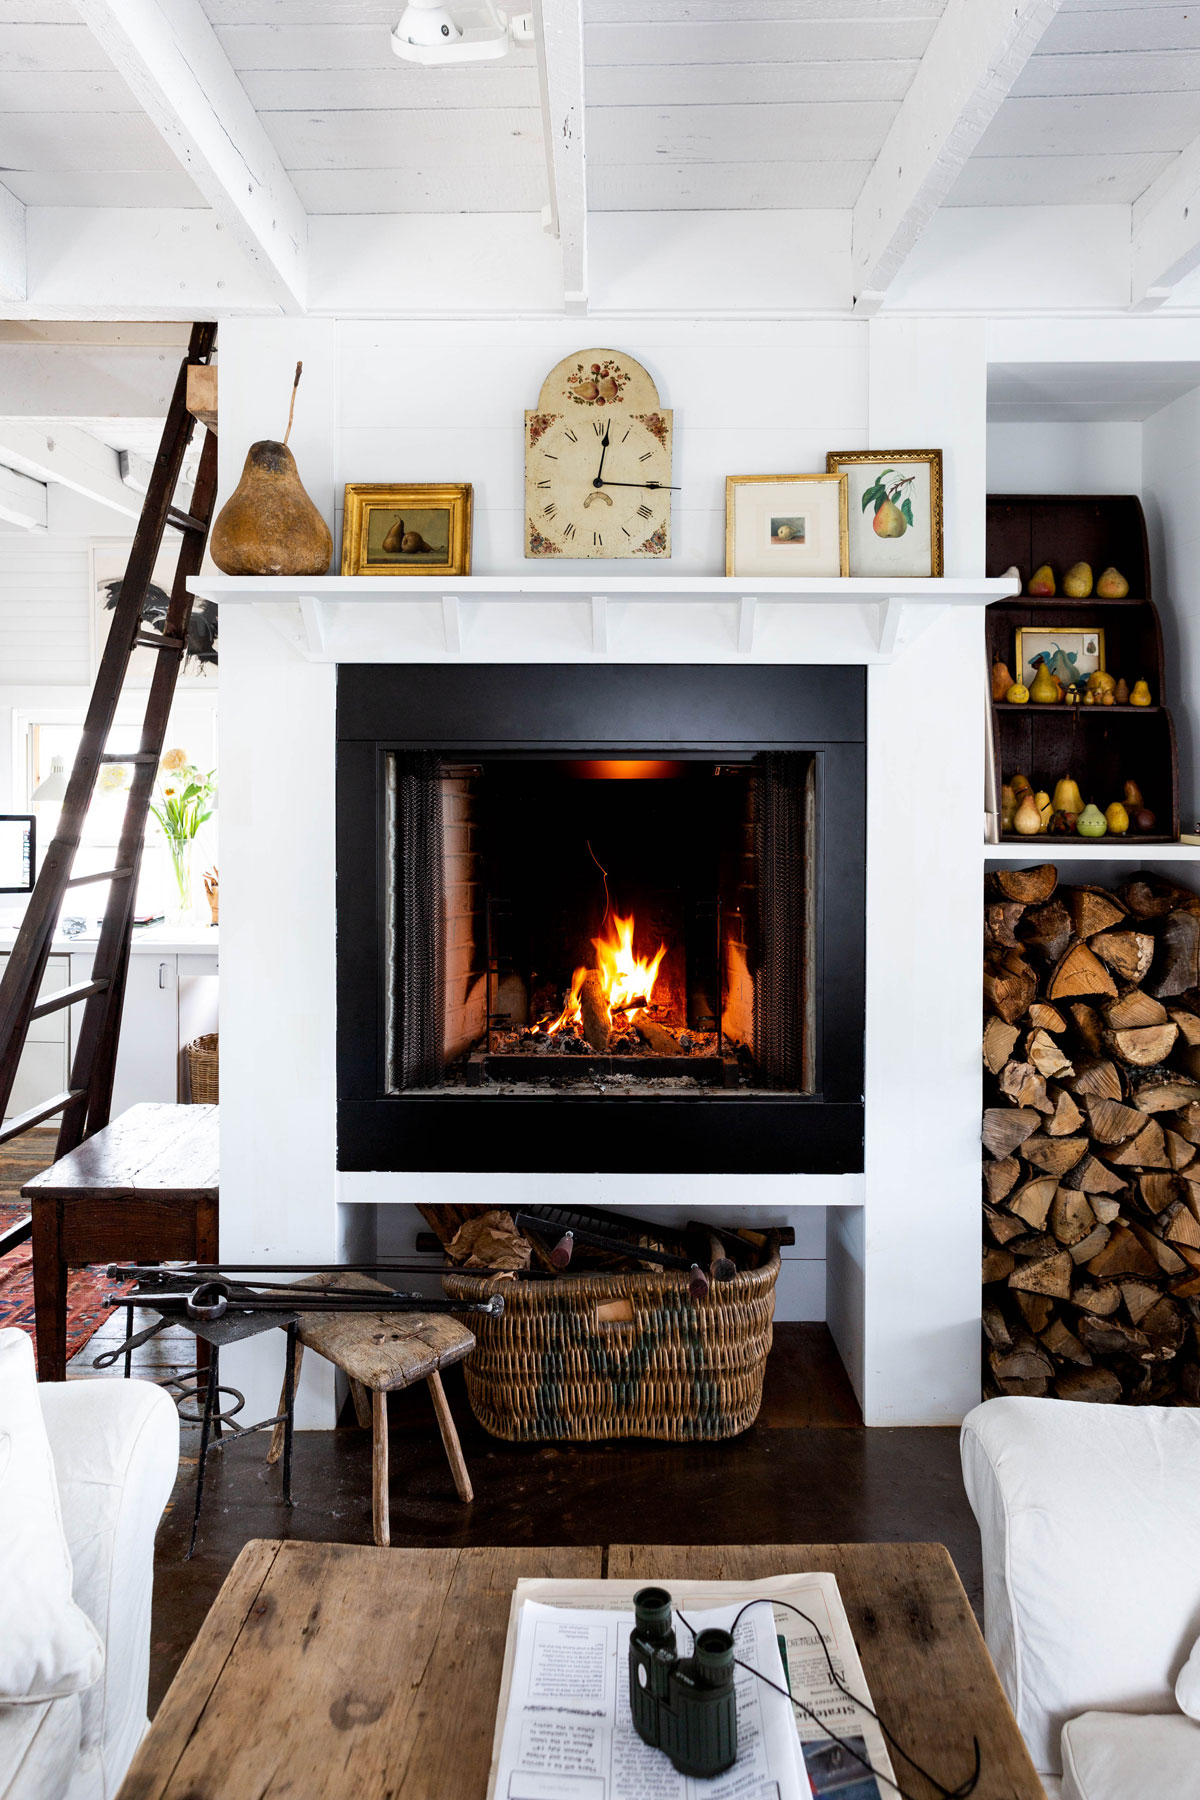 A good fireplace and a hefty woodpile are household requirements in Maine, even on midsummer nights. That’s why Paul planned for a built-in firewood niche. Fuel for the fire is always within reach.